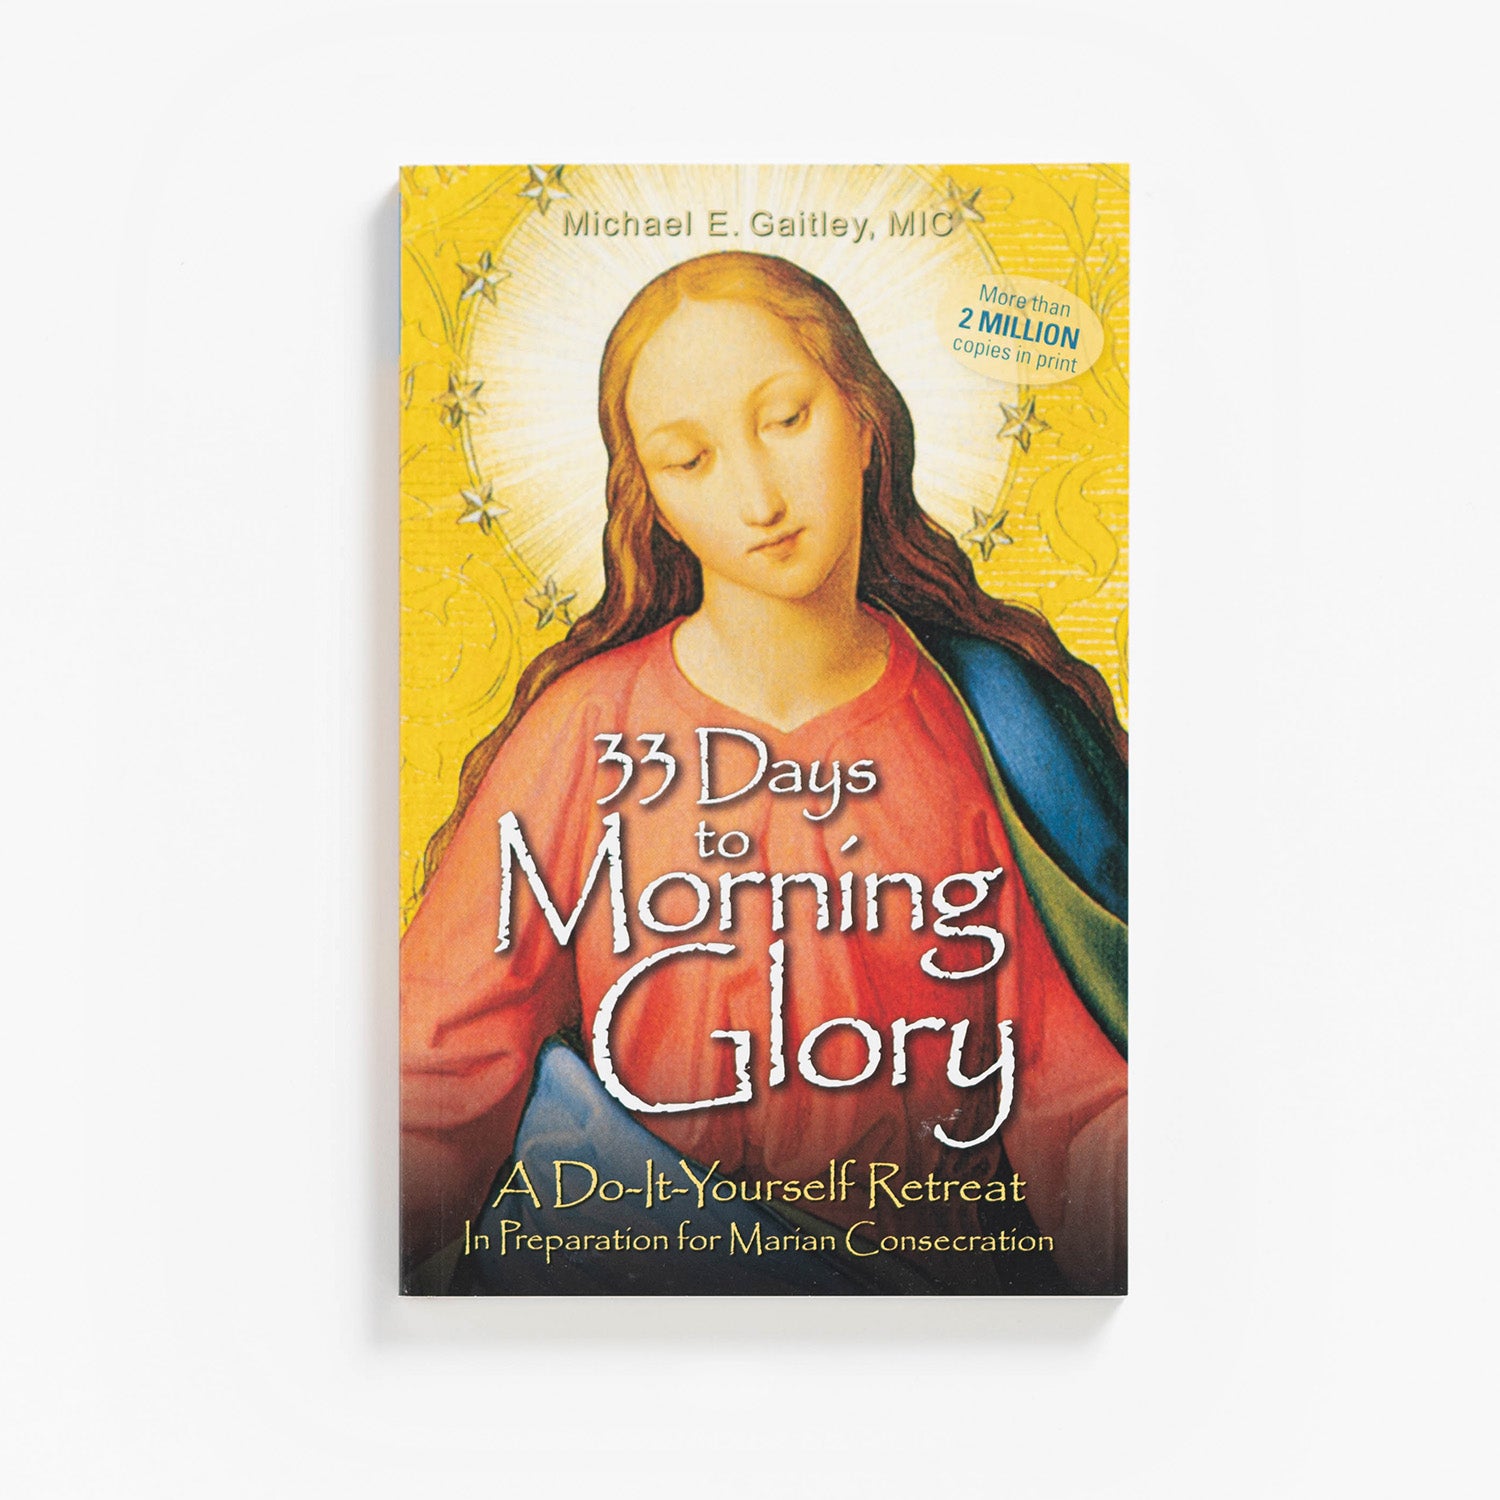 33 Days to Morning Glory: A Do-It- Yourself Retreat in Preparation for Marian Consecration